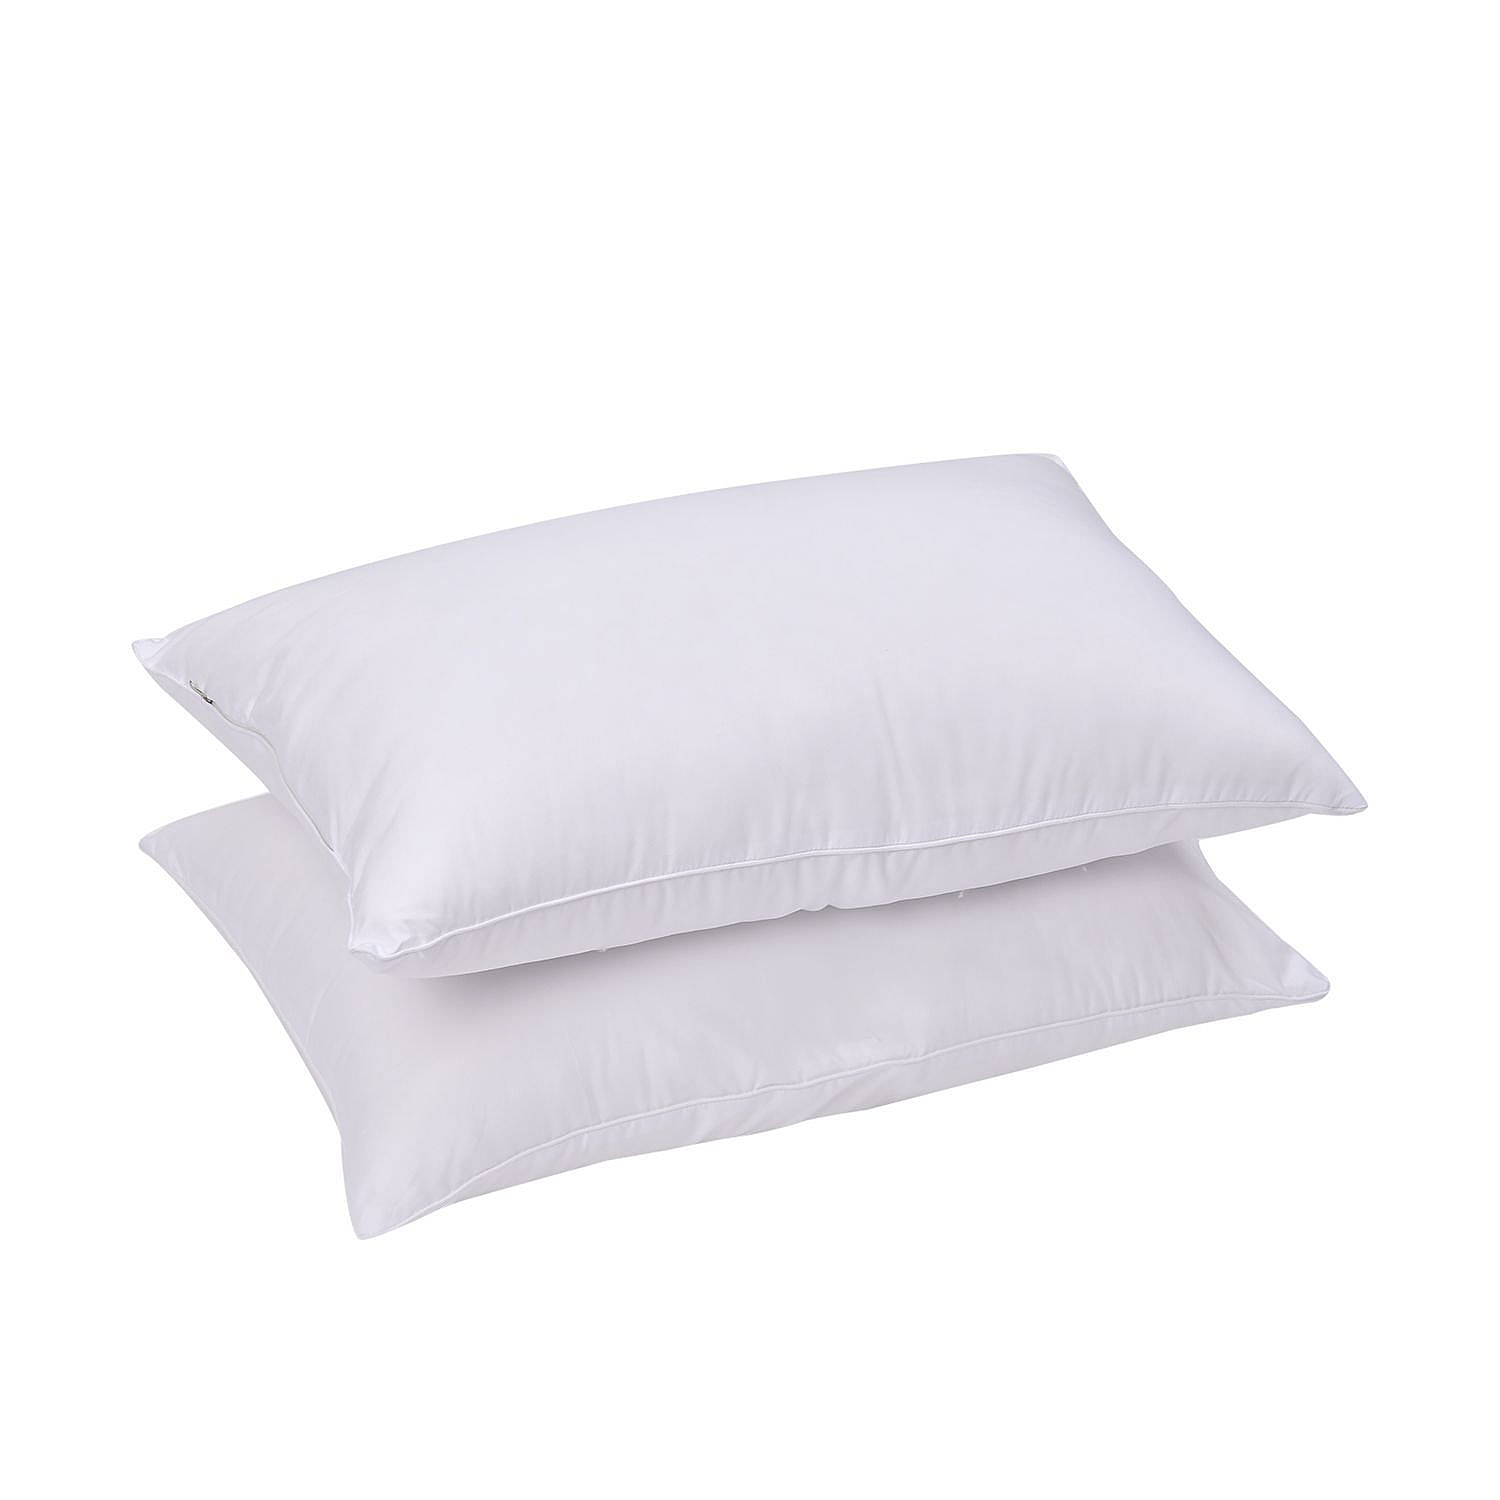 Set-of-2-Bounce-Back-Pillows-with-Piping-Size-74x48-White